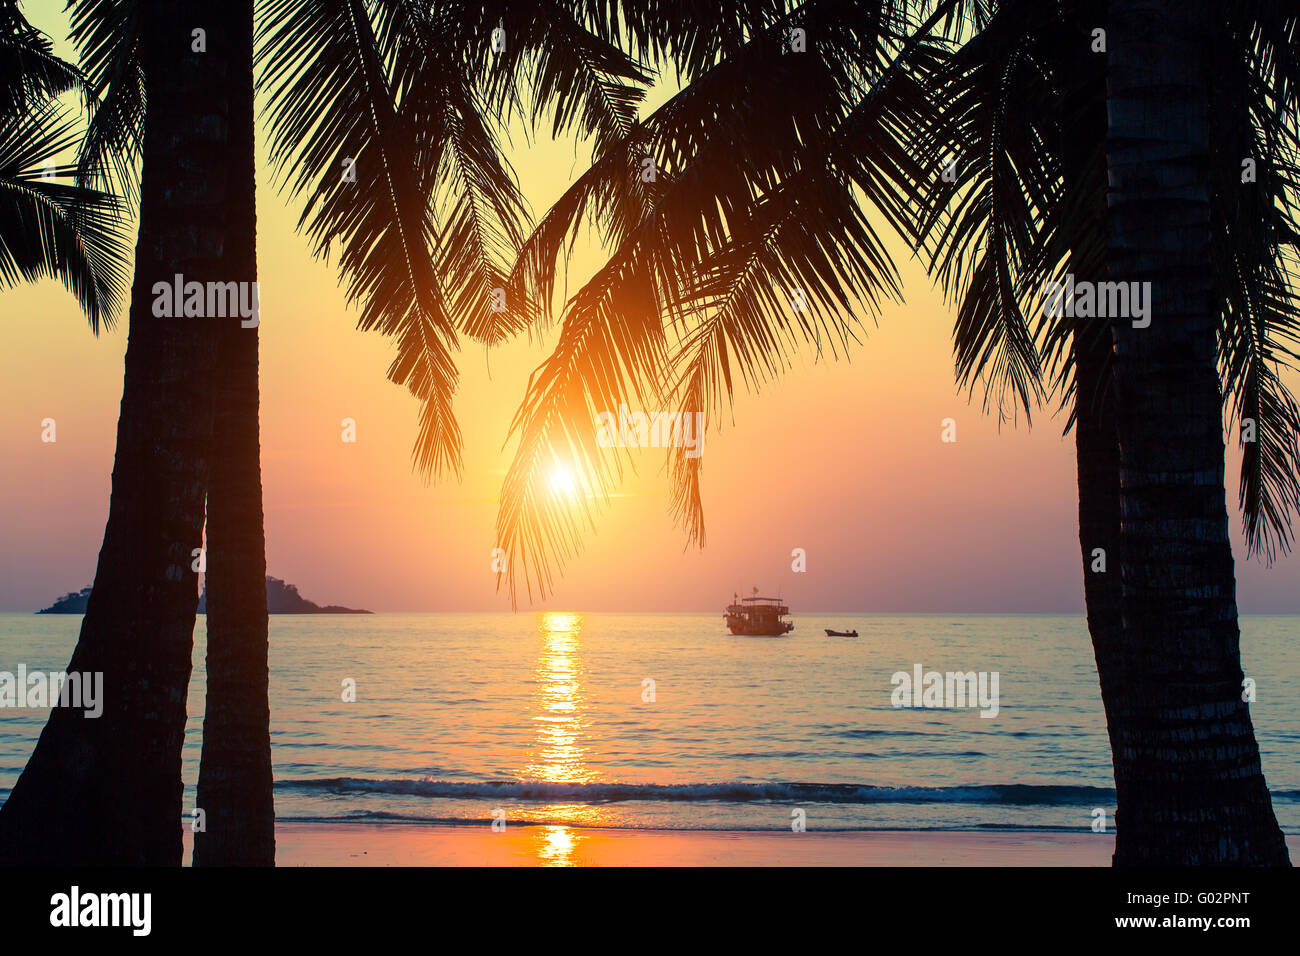 Tropical seashore, silhouettes of palm leaves during an amazing sunset. Stock Photo